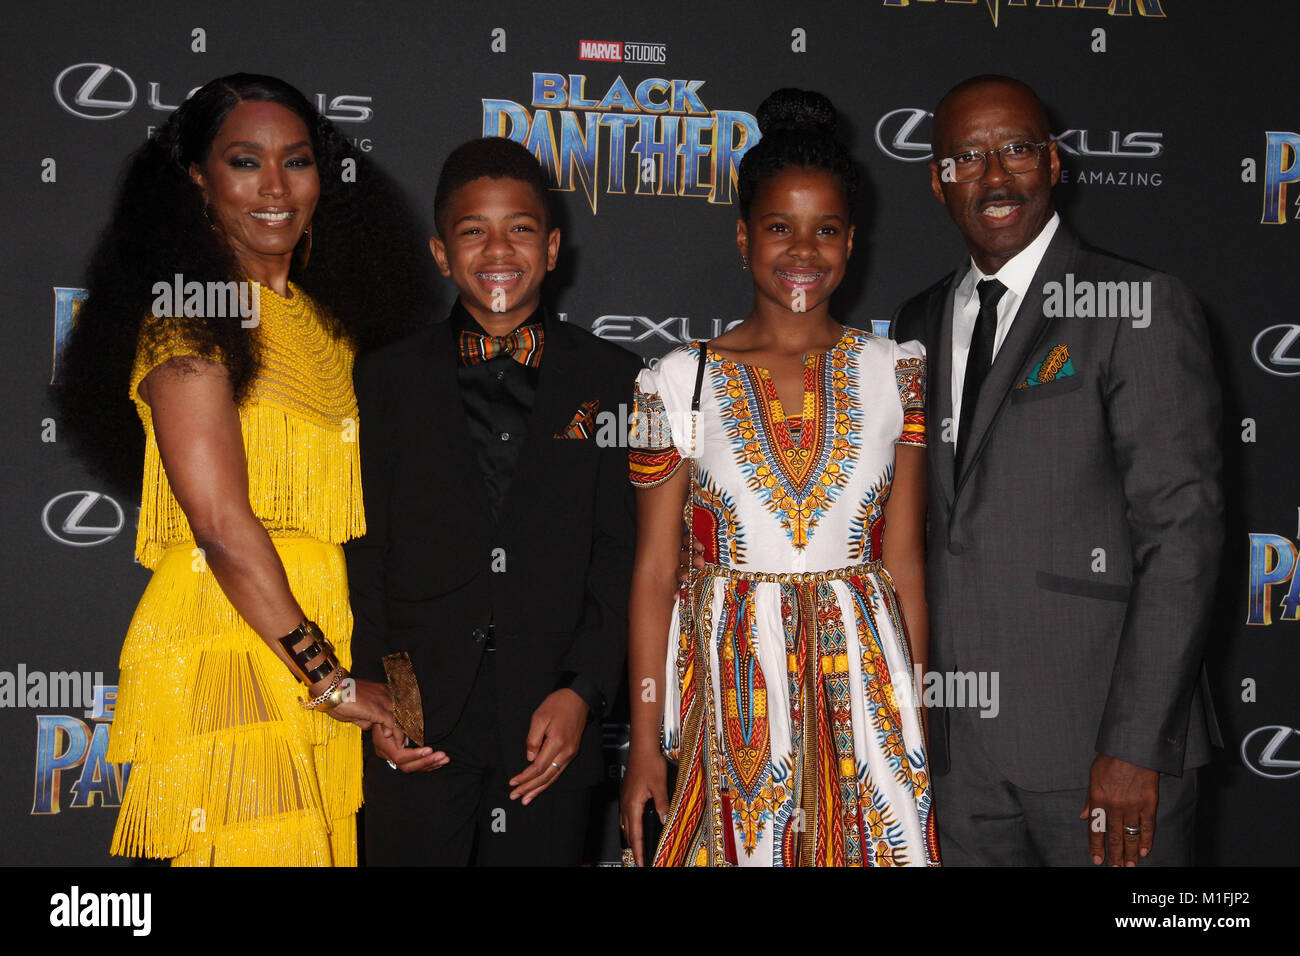 Angela Bassett, Slater Vance, Bronwyn Vance,  Courtney B. Vance  01/29/2018 The World Premiere of 'Black Panther' held at The Dolby Theatre in Los Angeles, CA  Photo: Cronos/Hollywood News Stock Photo